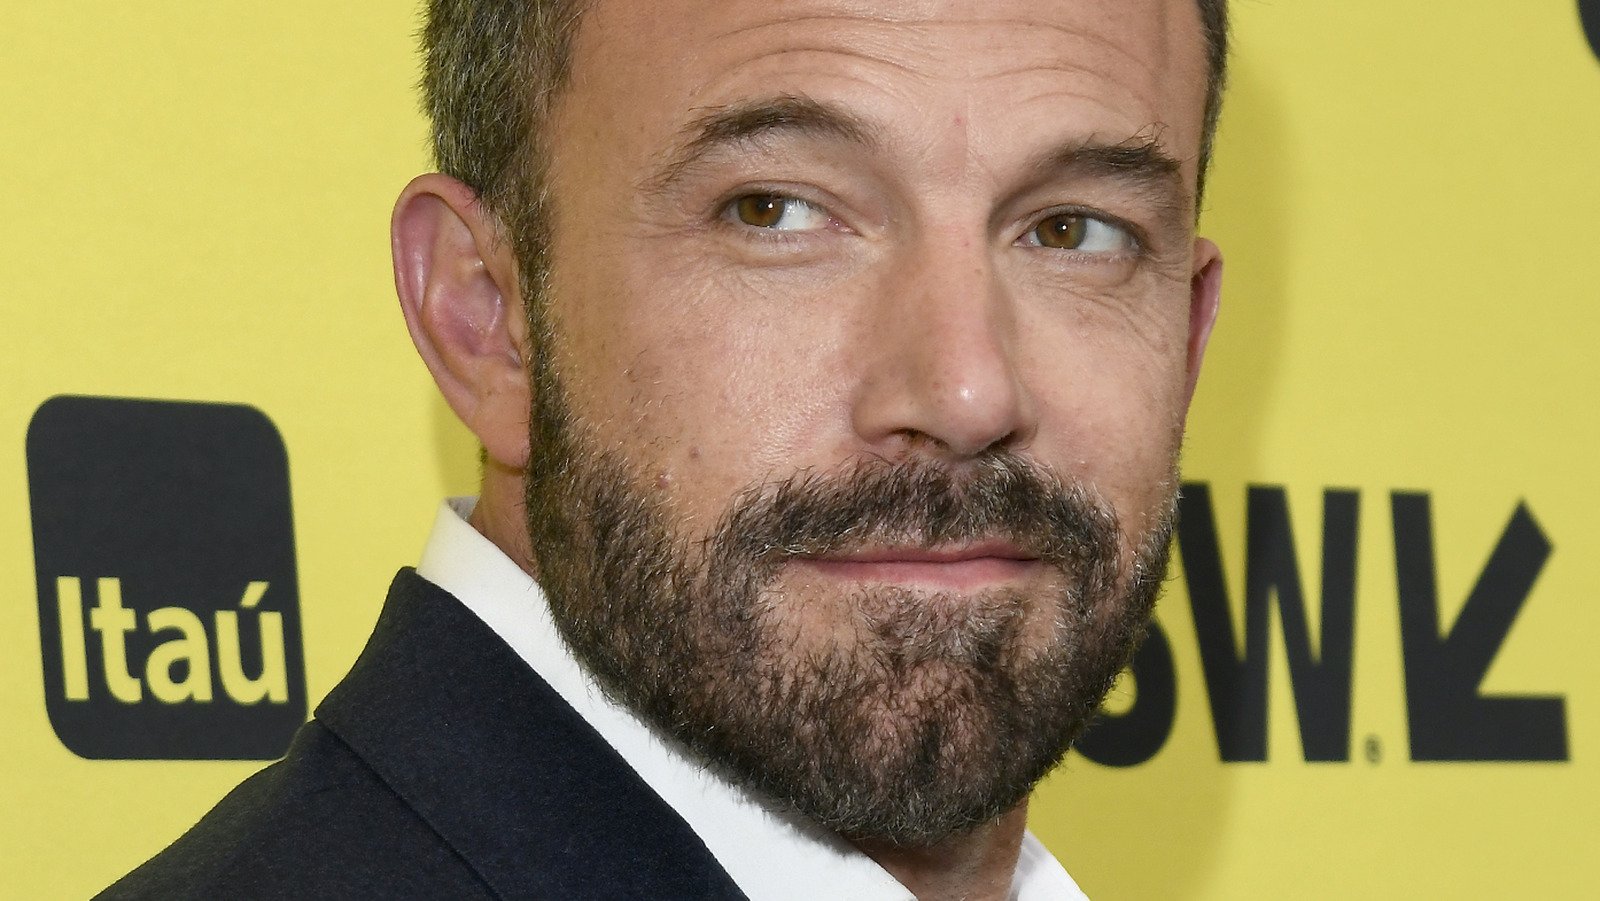 Details About Ben Affleck's Relationship With His Daughter Violet